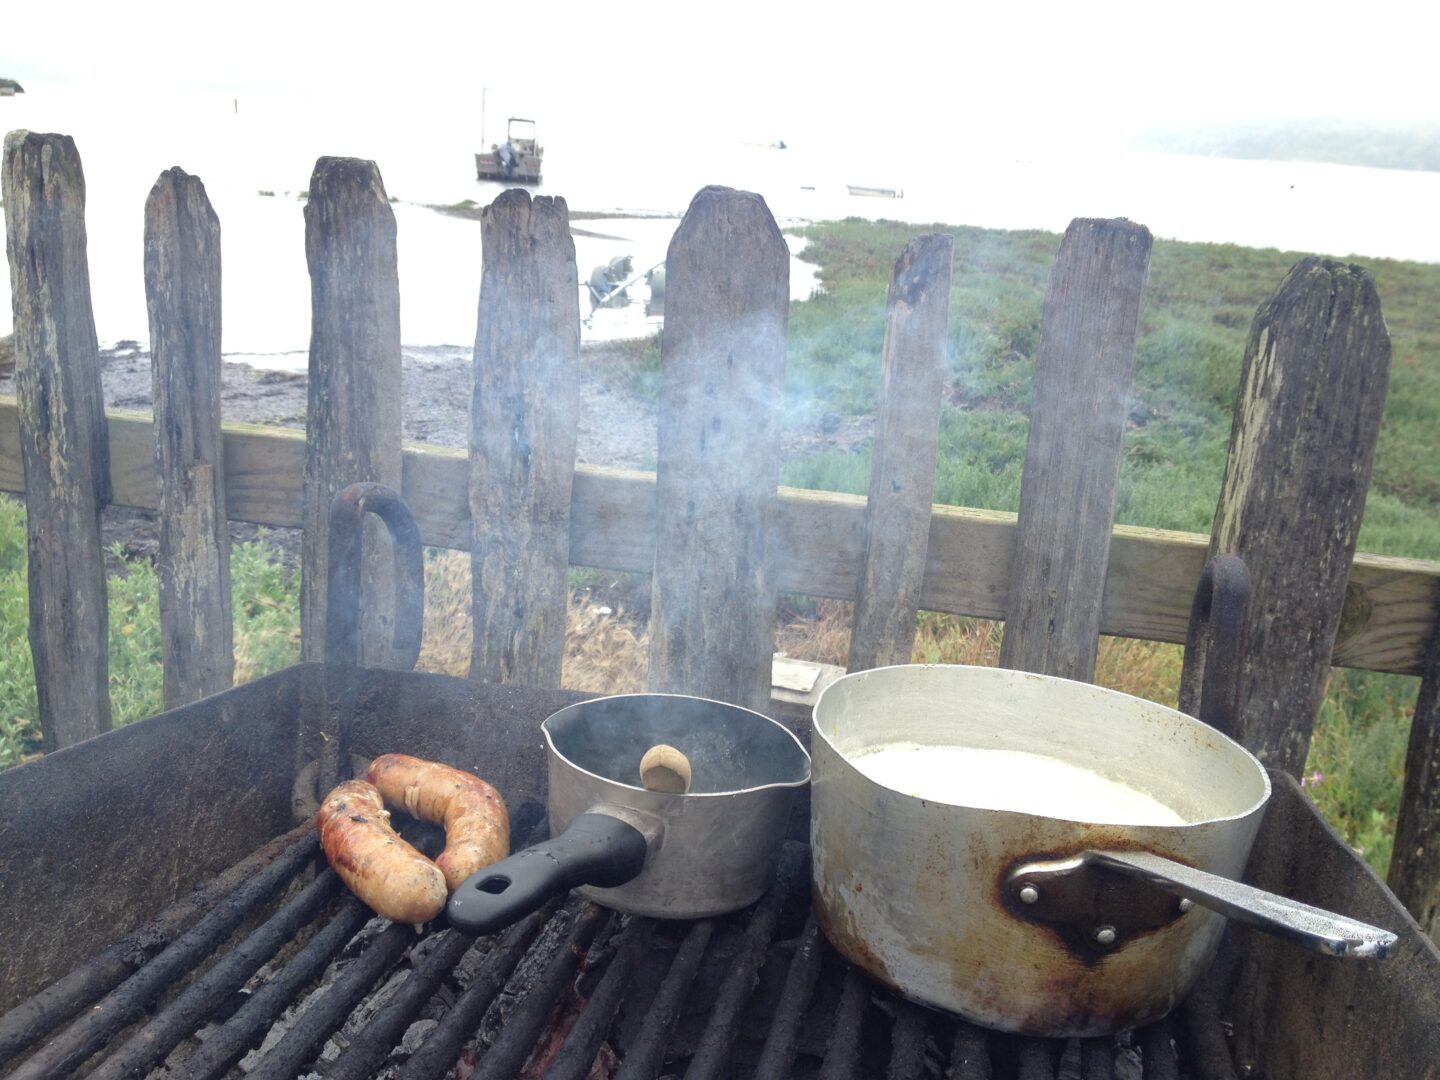 A grill with sausages and a pot of milk.